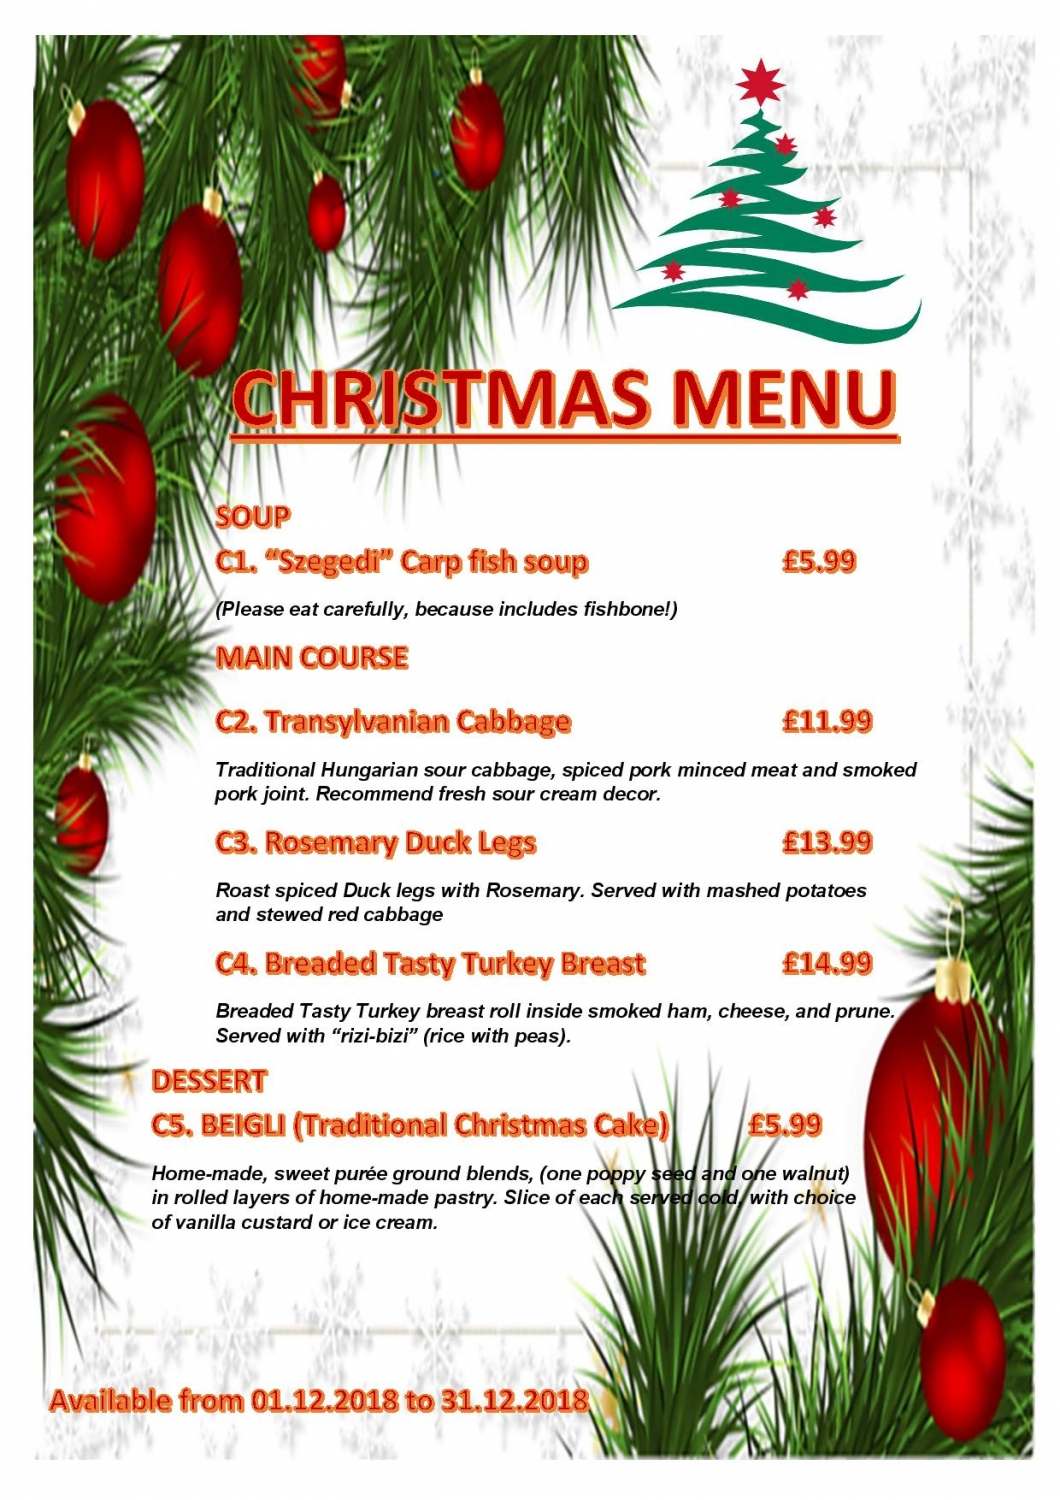 Our Christmas Menu is here! Goulash Hungarian Restaurant